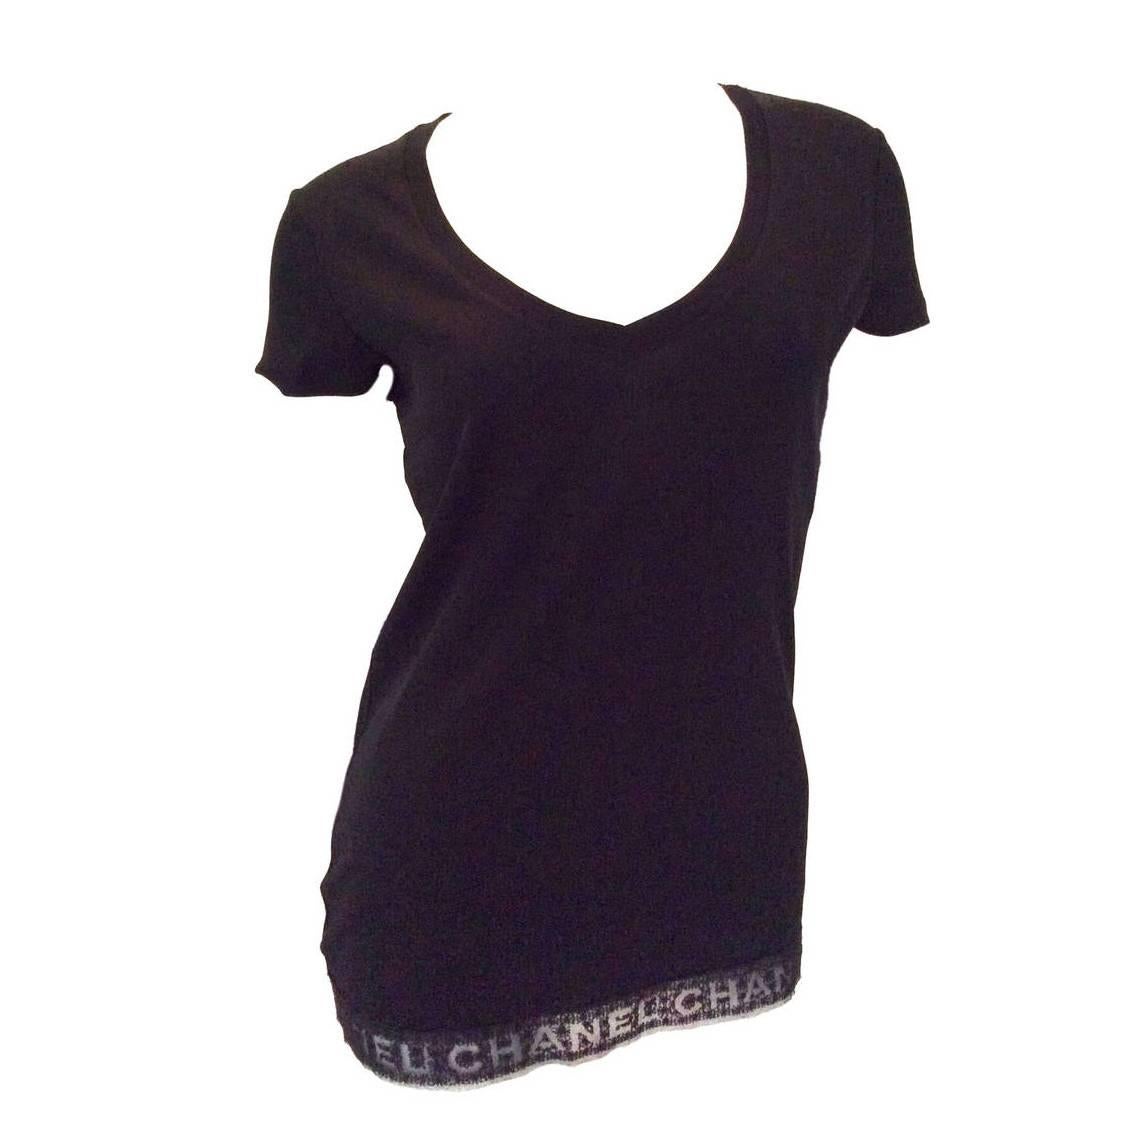 Chanel Black Tee Shirt - Size 36 For Sale